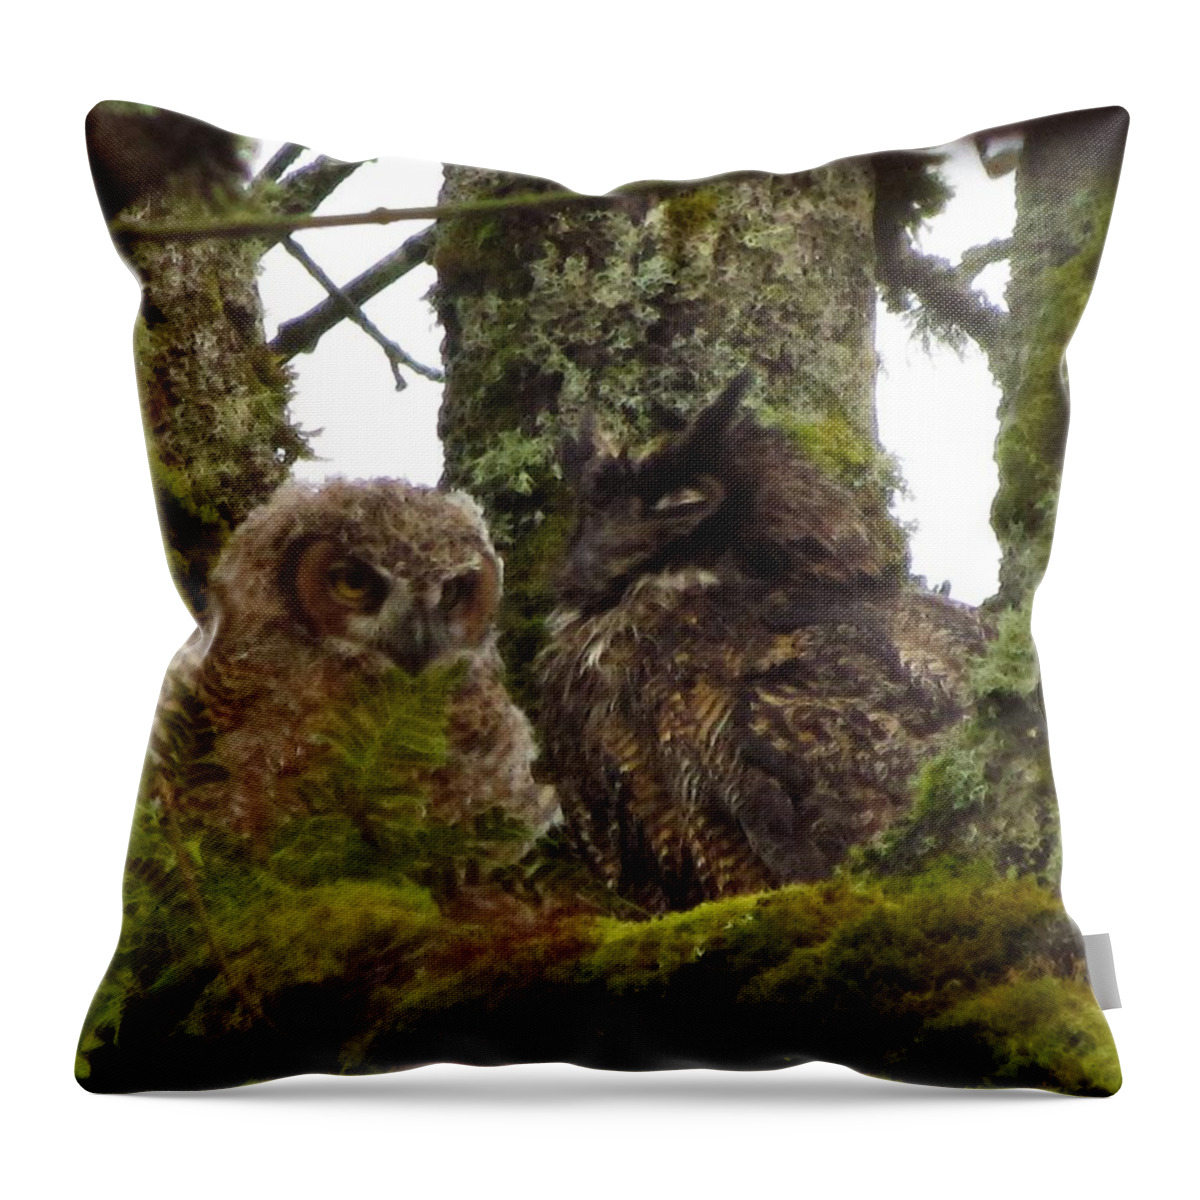 Great Horned Owl And Owlet Throw Pillow featuring the photograph Sharing Ancient Wisdoms by I'ina Van Lawick